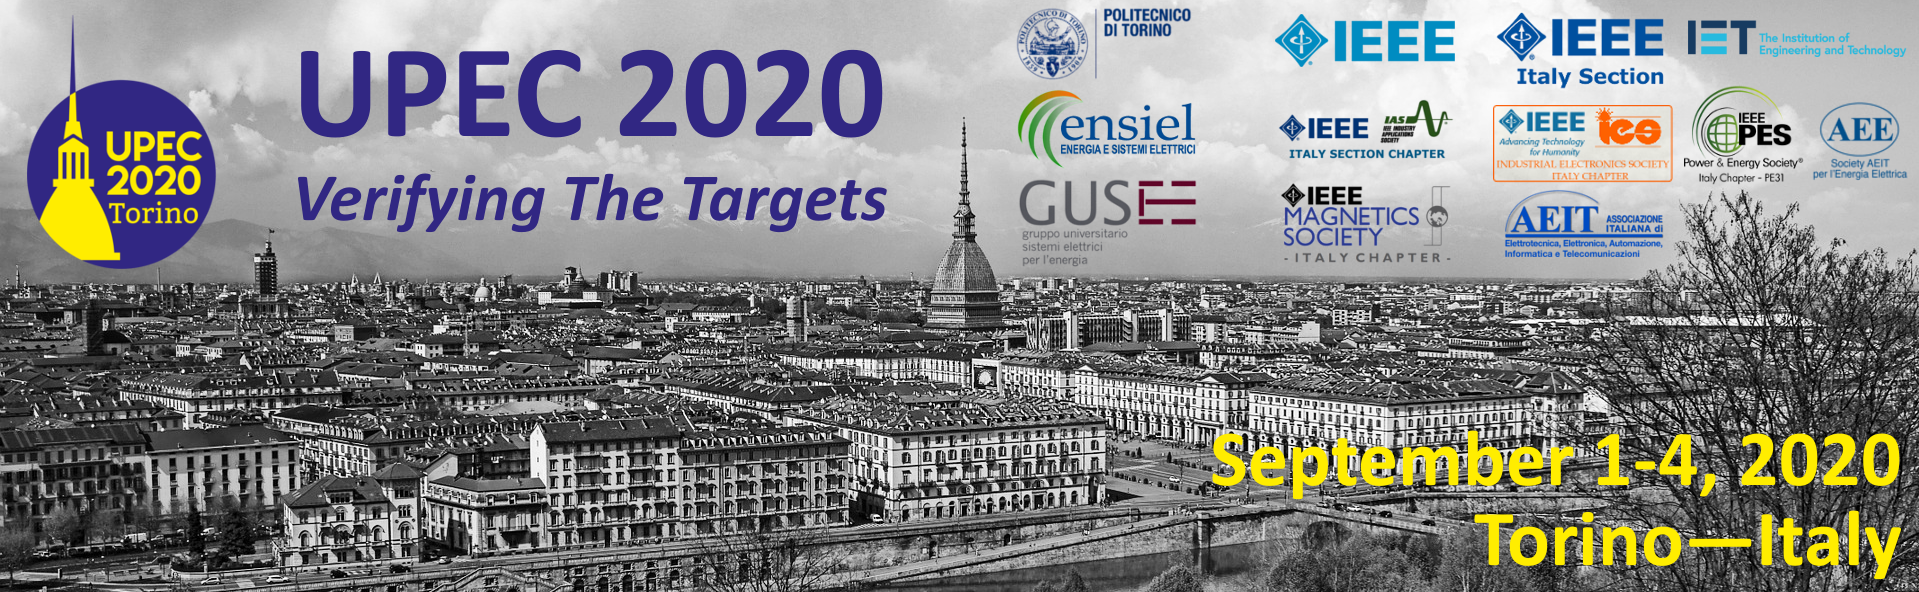 Virtual Conference UPEC 2020 – Verifying The Targets